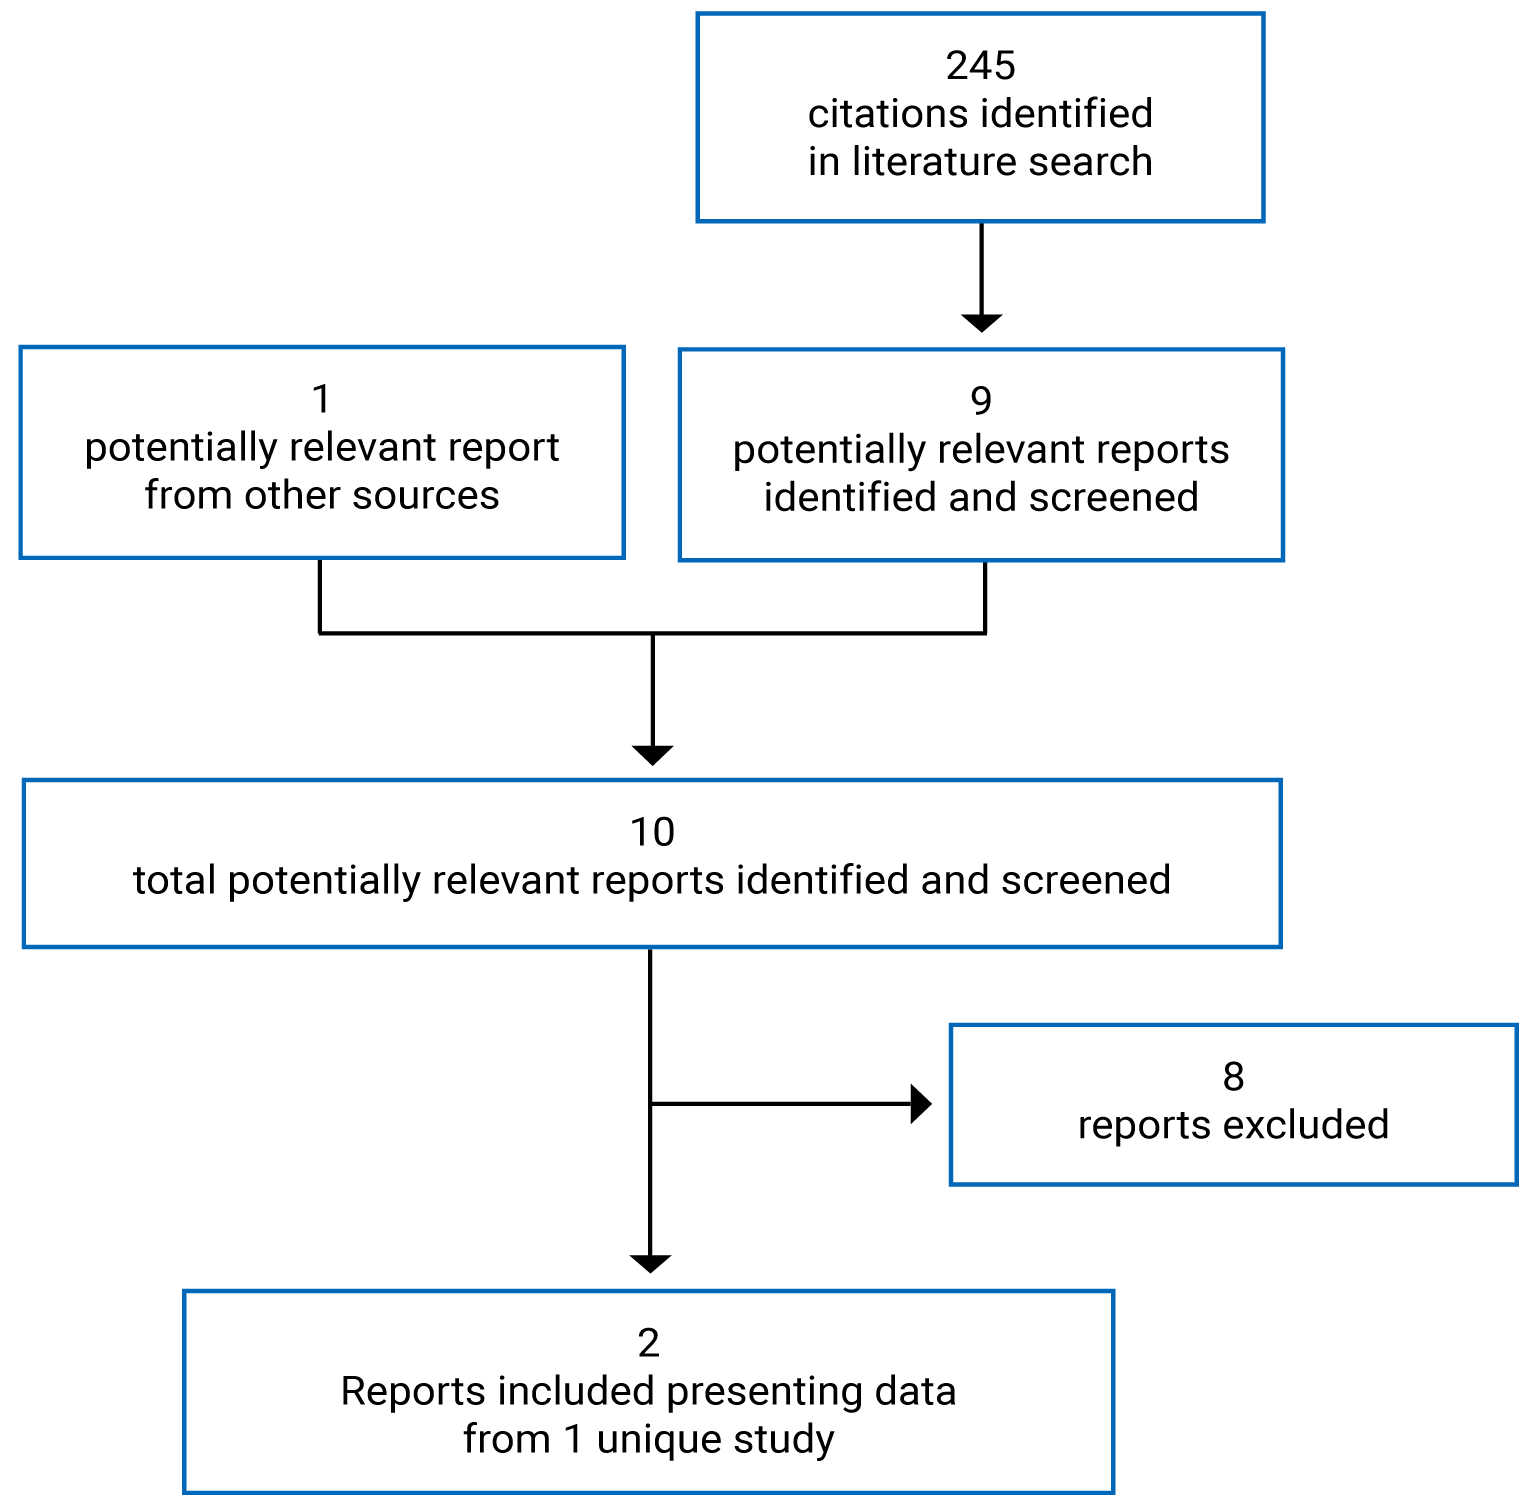 245 citations were identified in the literature search and 1 additional potentially relevant report was identified from other sources. In total, 2 reports presenting data from 1 unique study were included in the review.